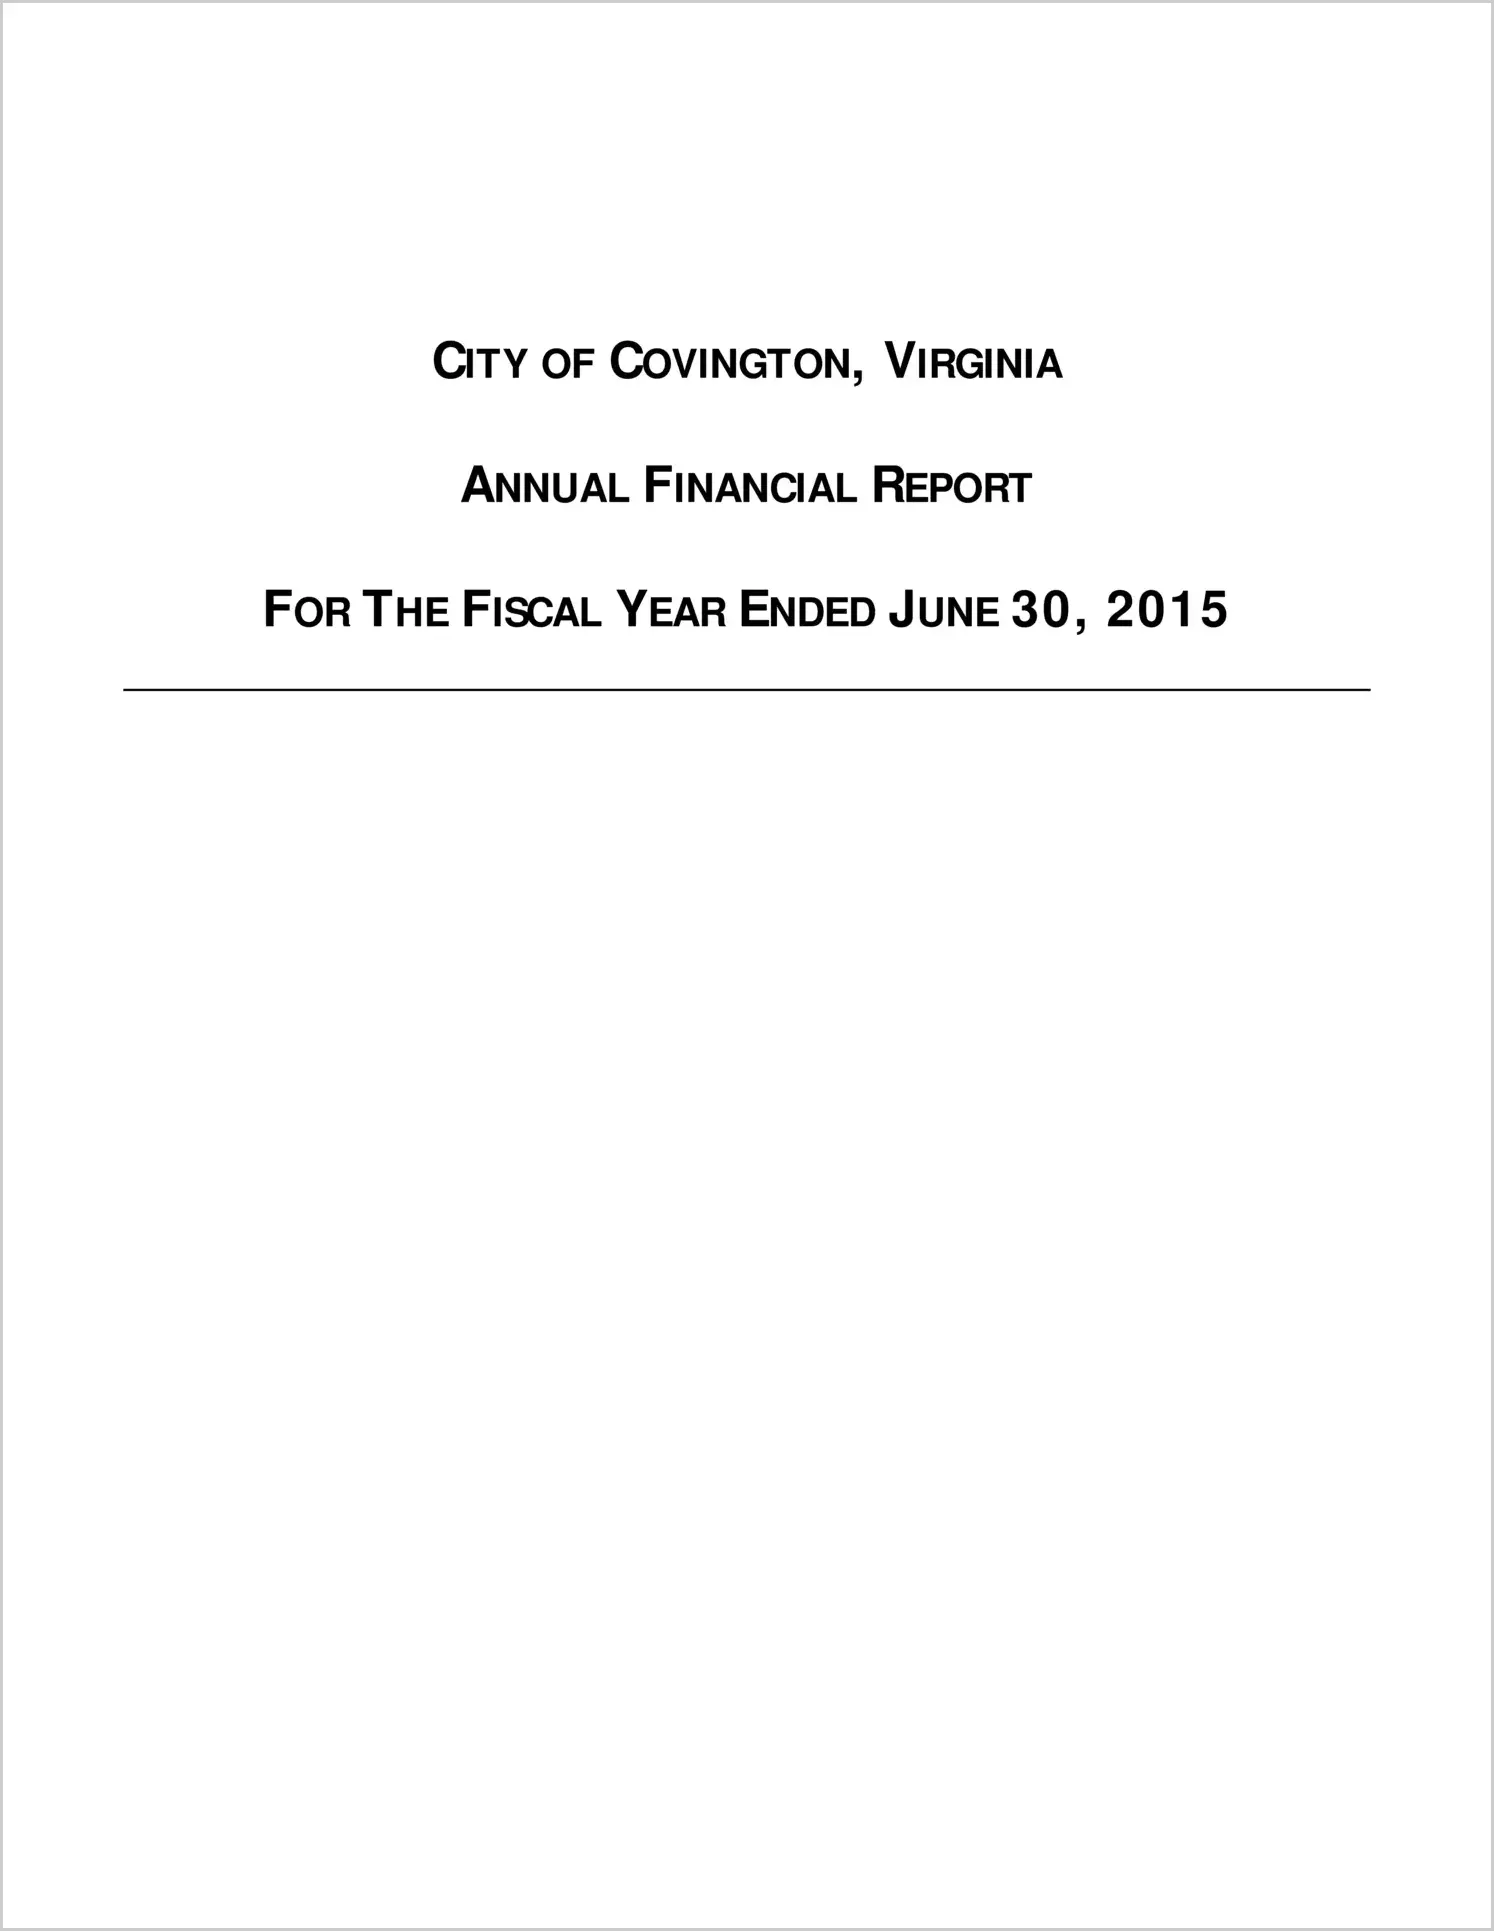 2015 Annual Financial Report for City of Covington